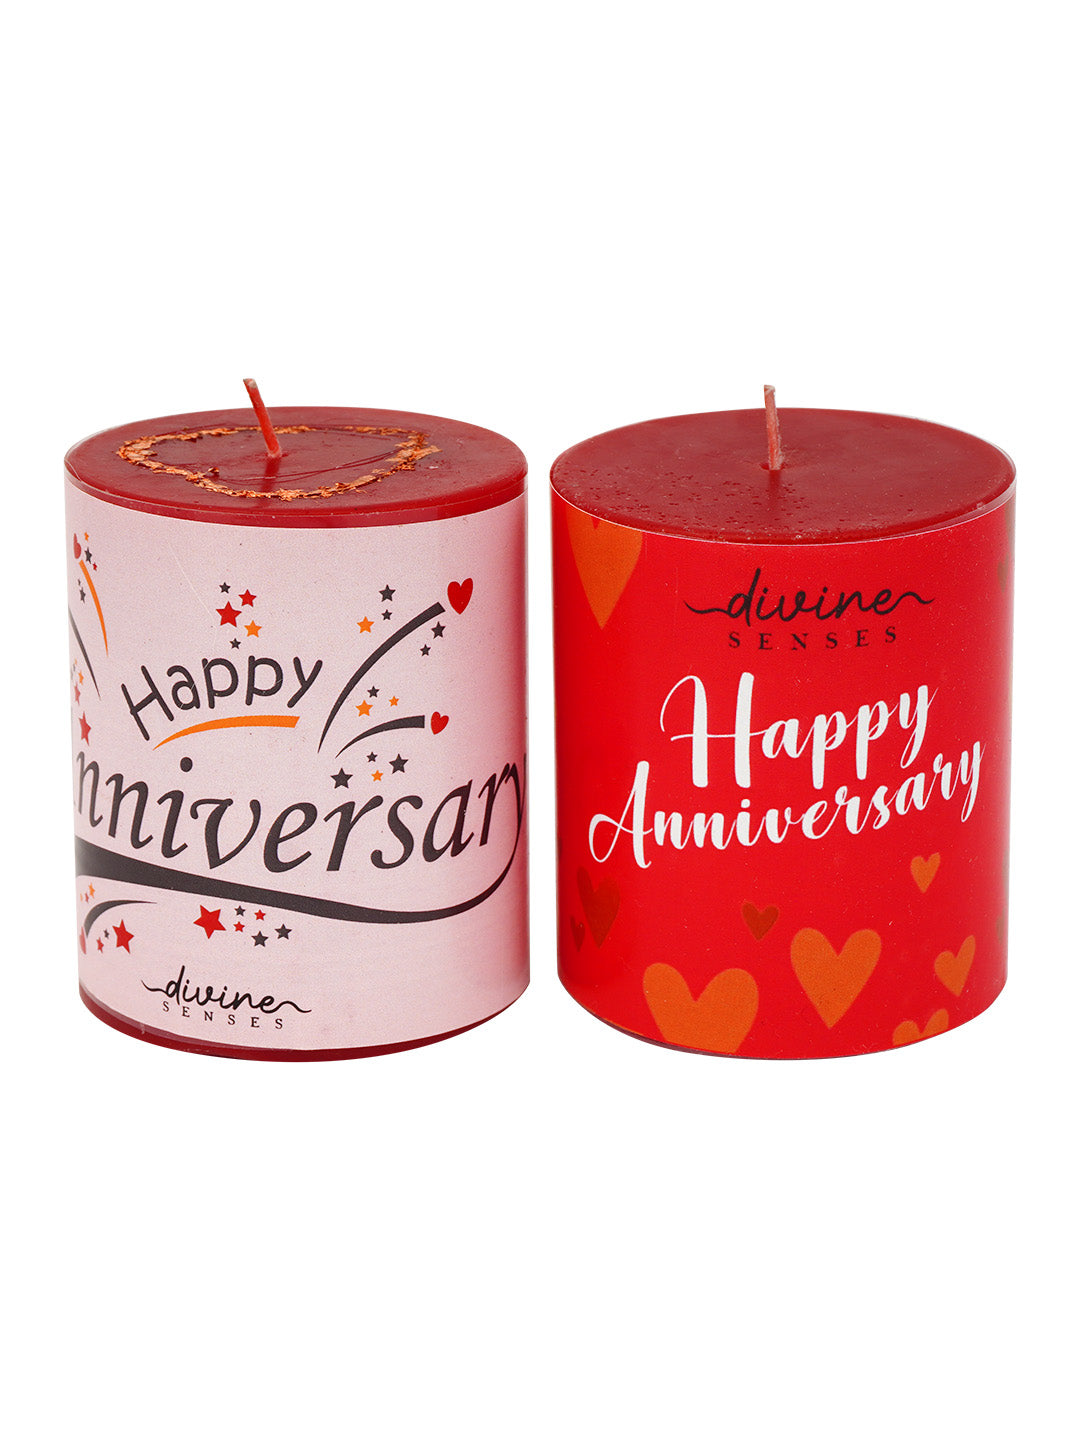 Red Candle with Personalized Message